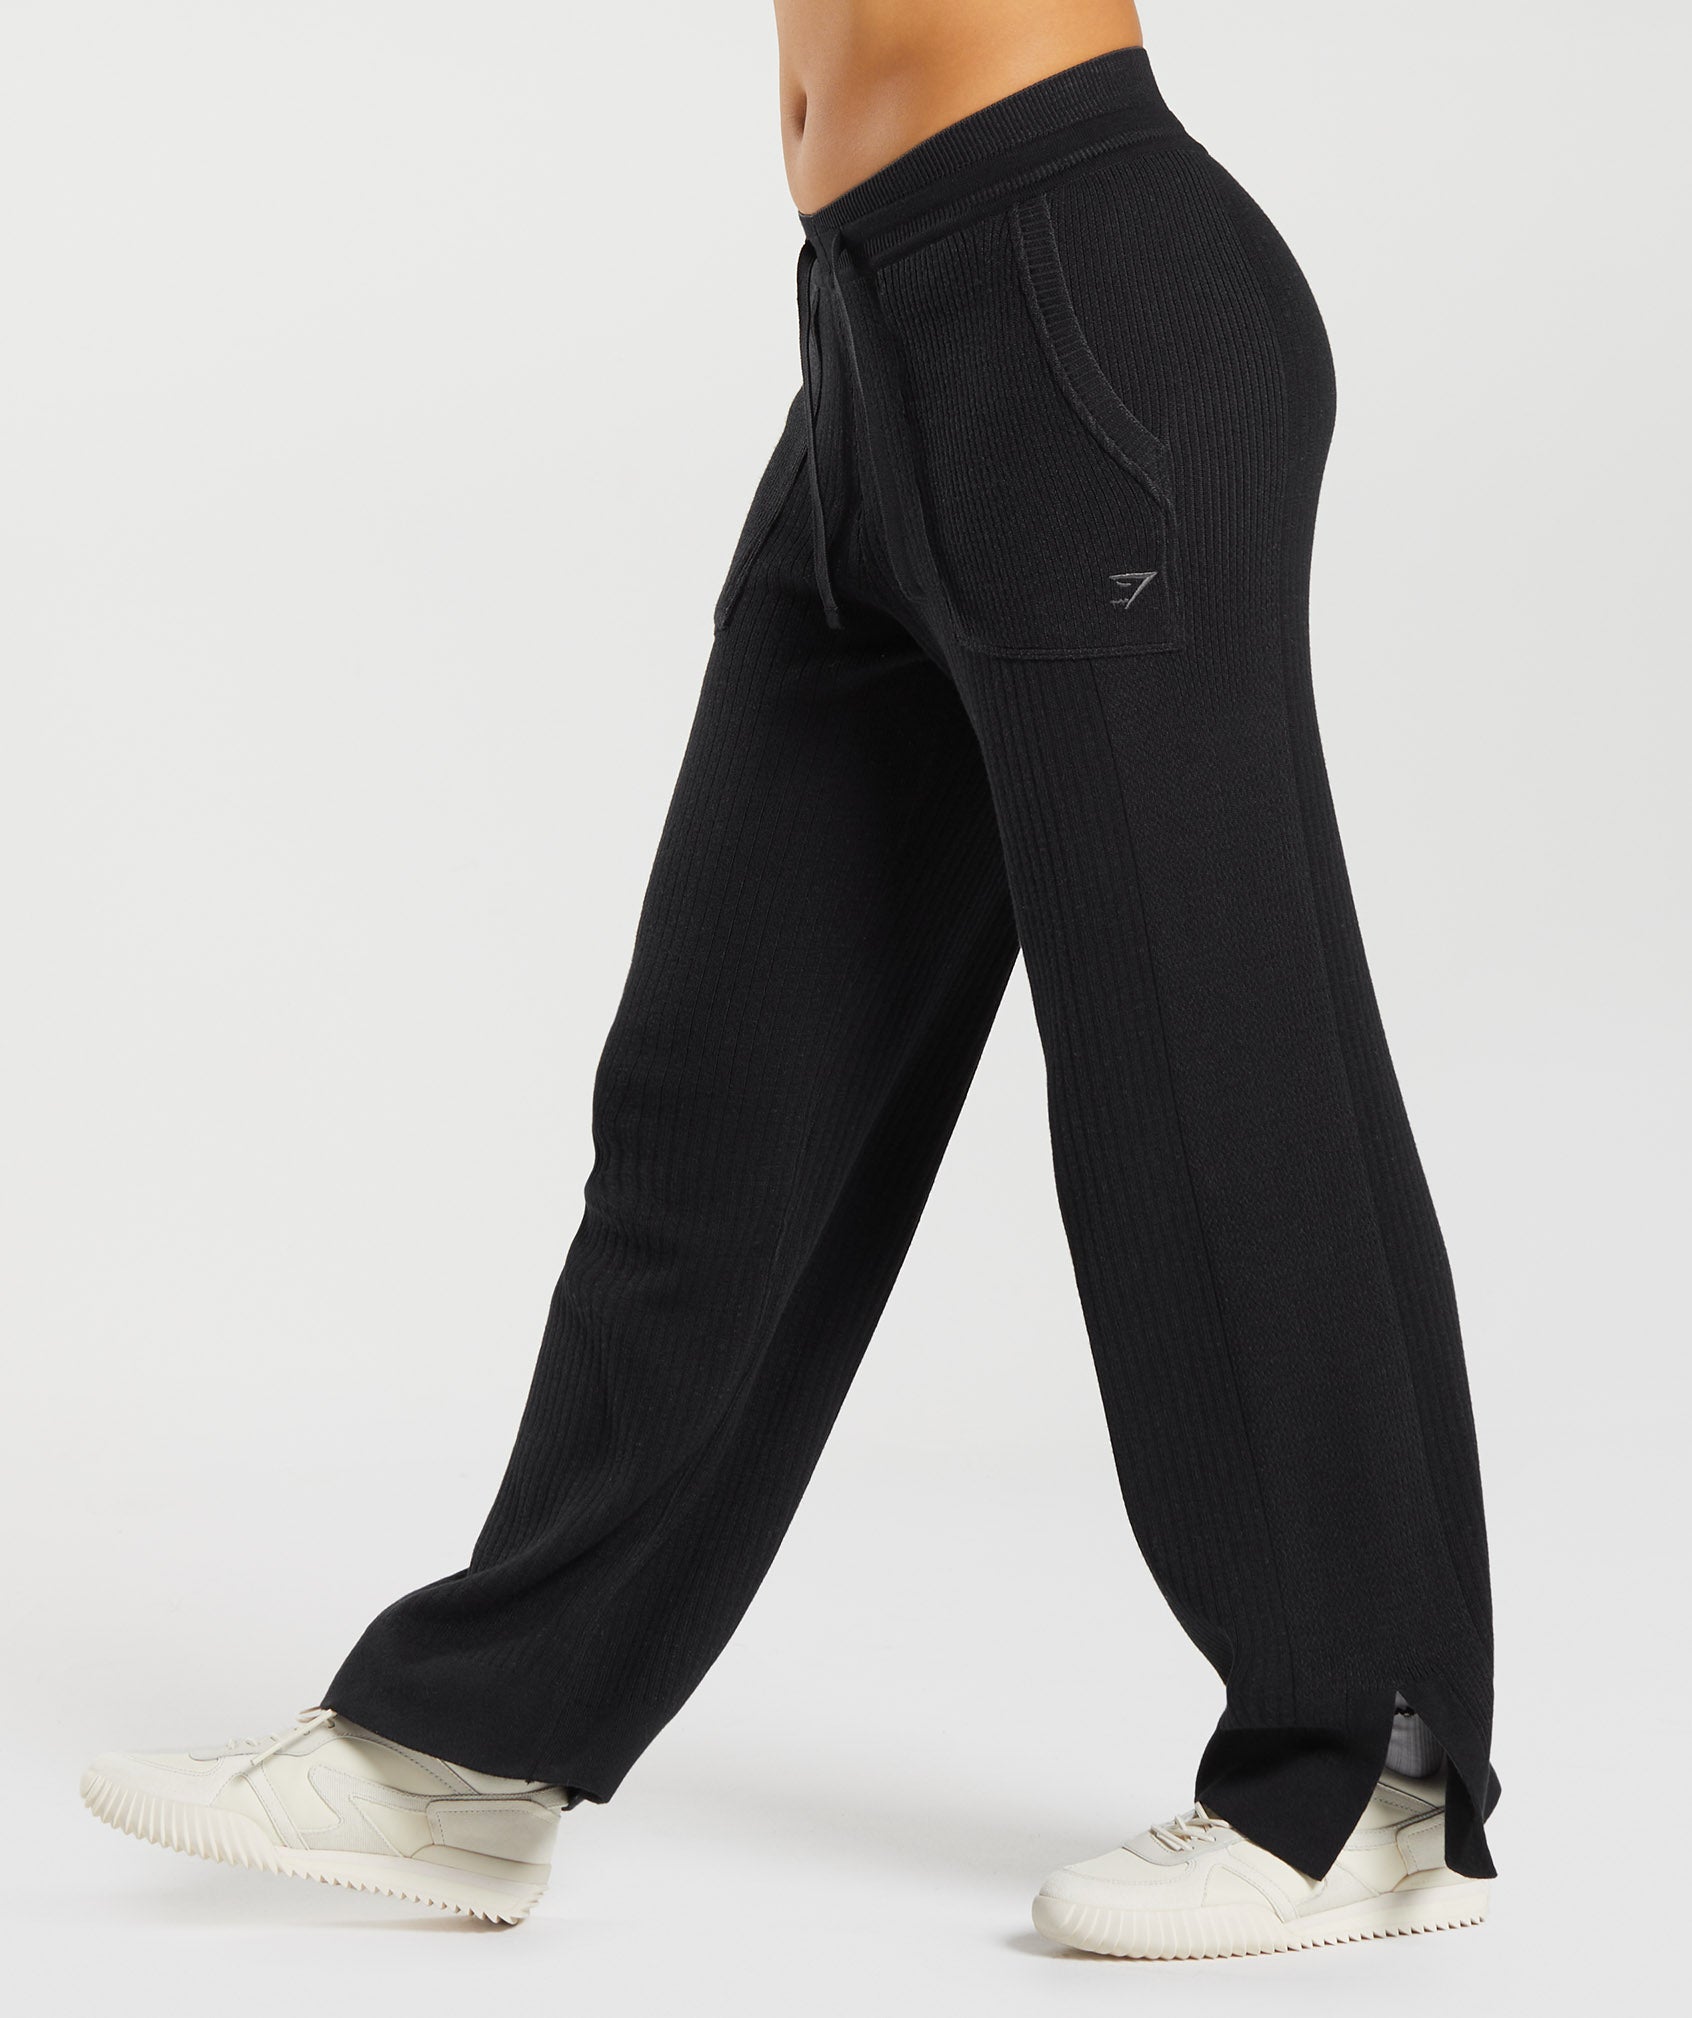 Gymshark Band Athletic Pants for Women